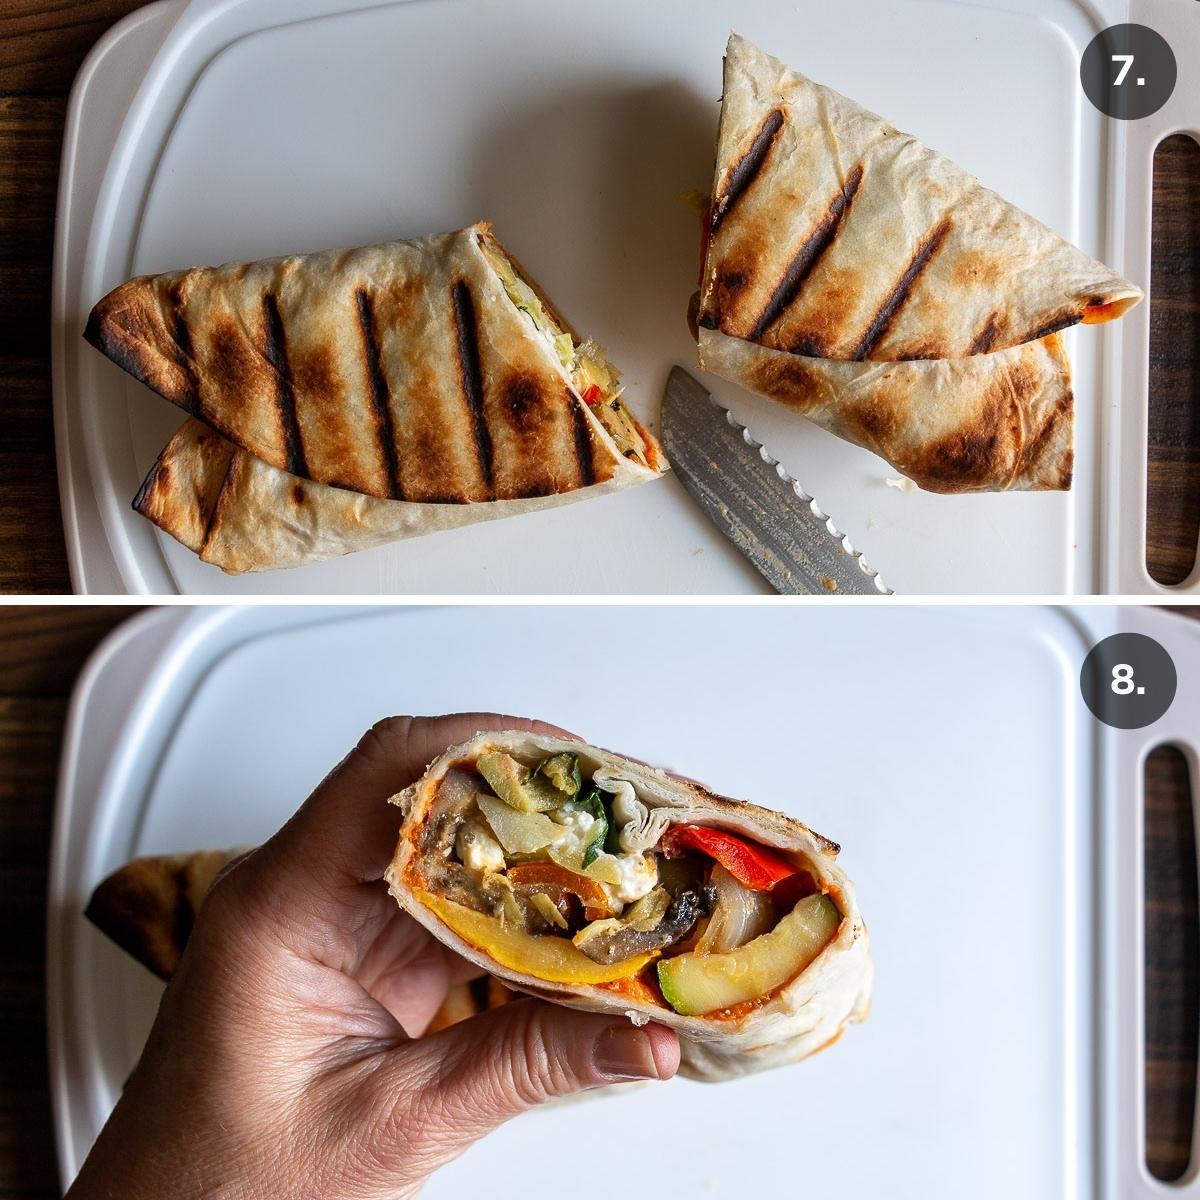 Grilled veggie wrap sliced in half and showing all the delicious filings inside. 